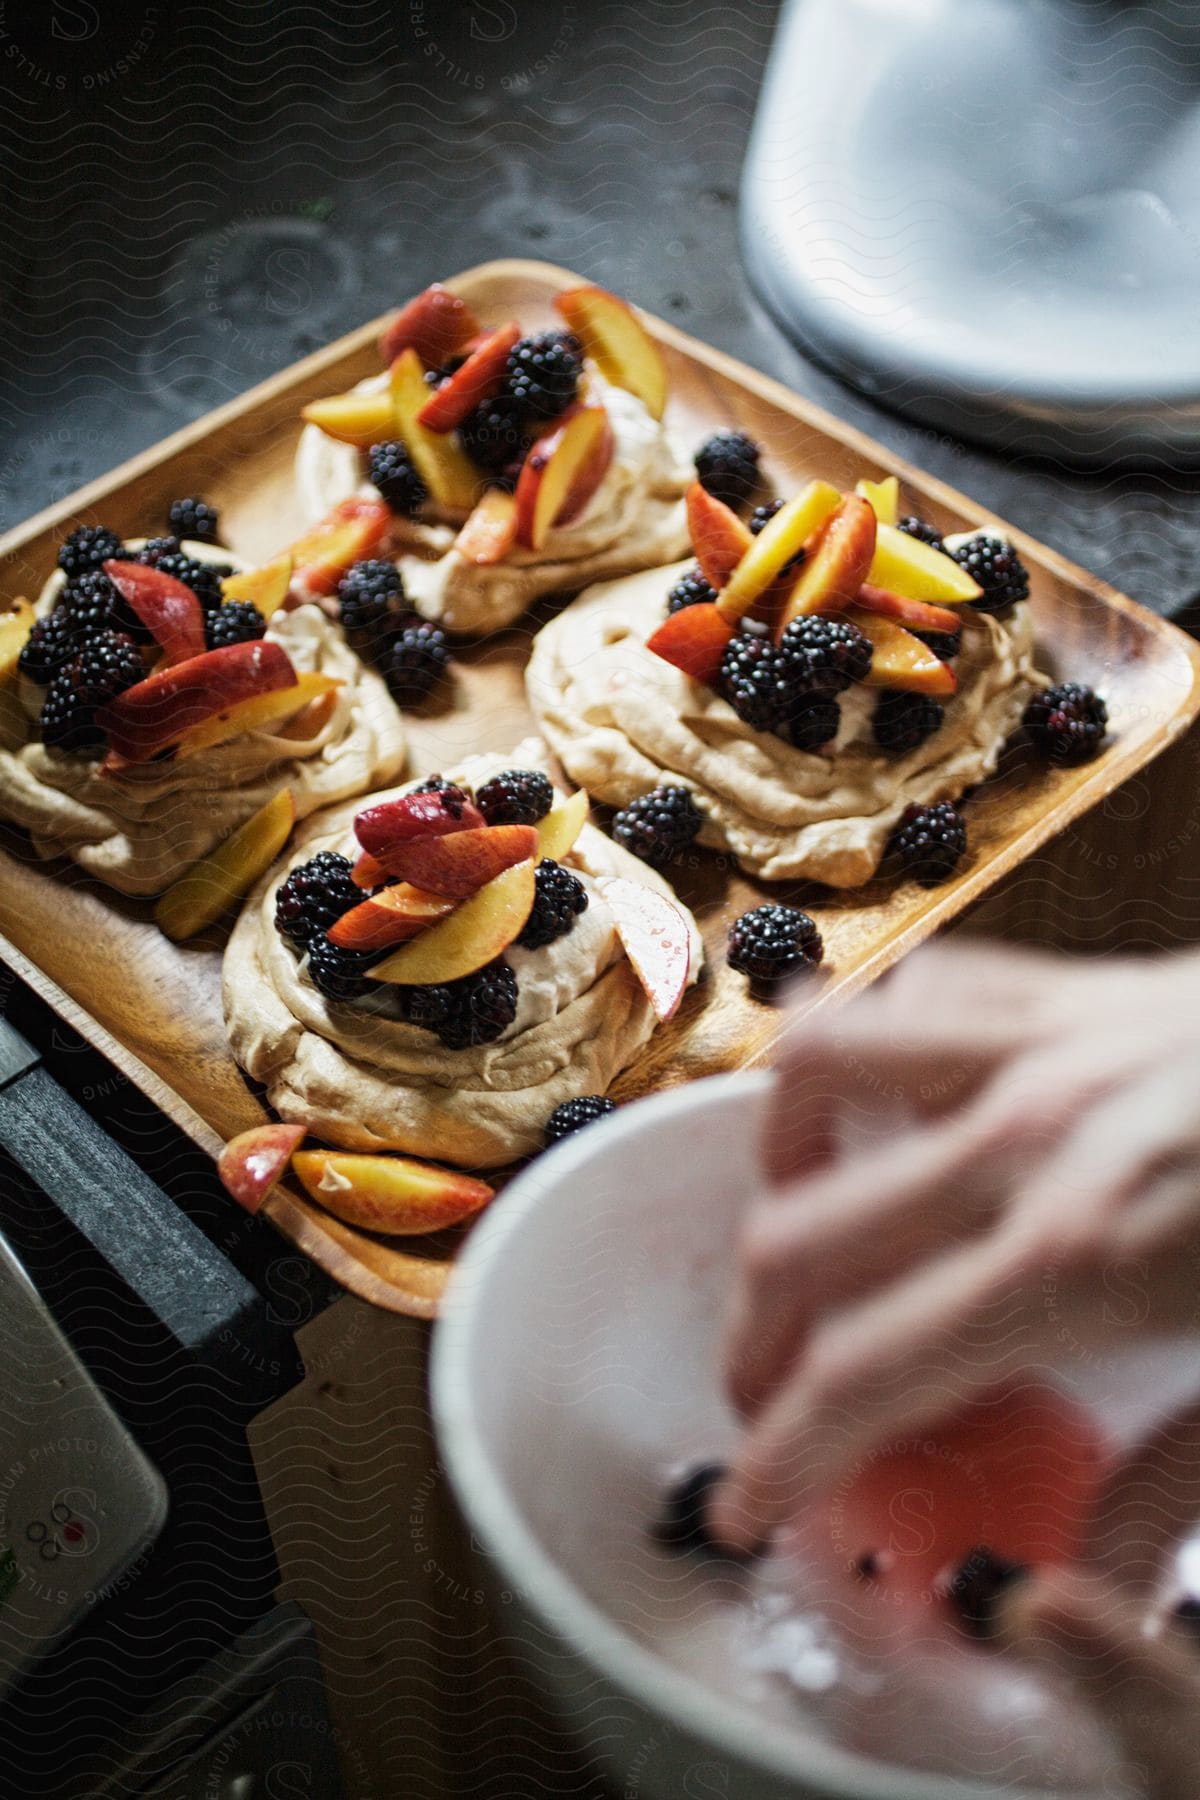 A person prepares a platter of appetizers adorned with blackberries and fruits